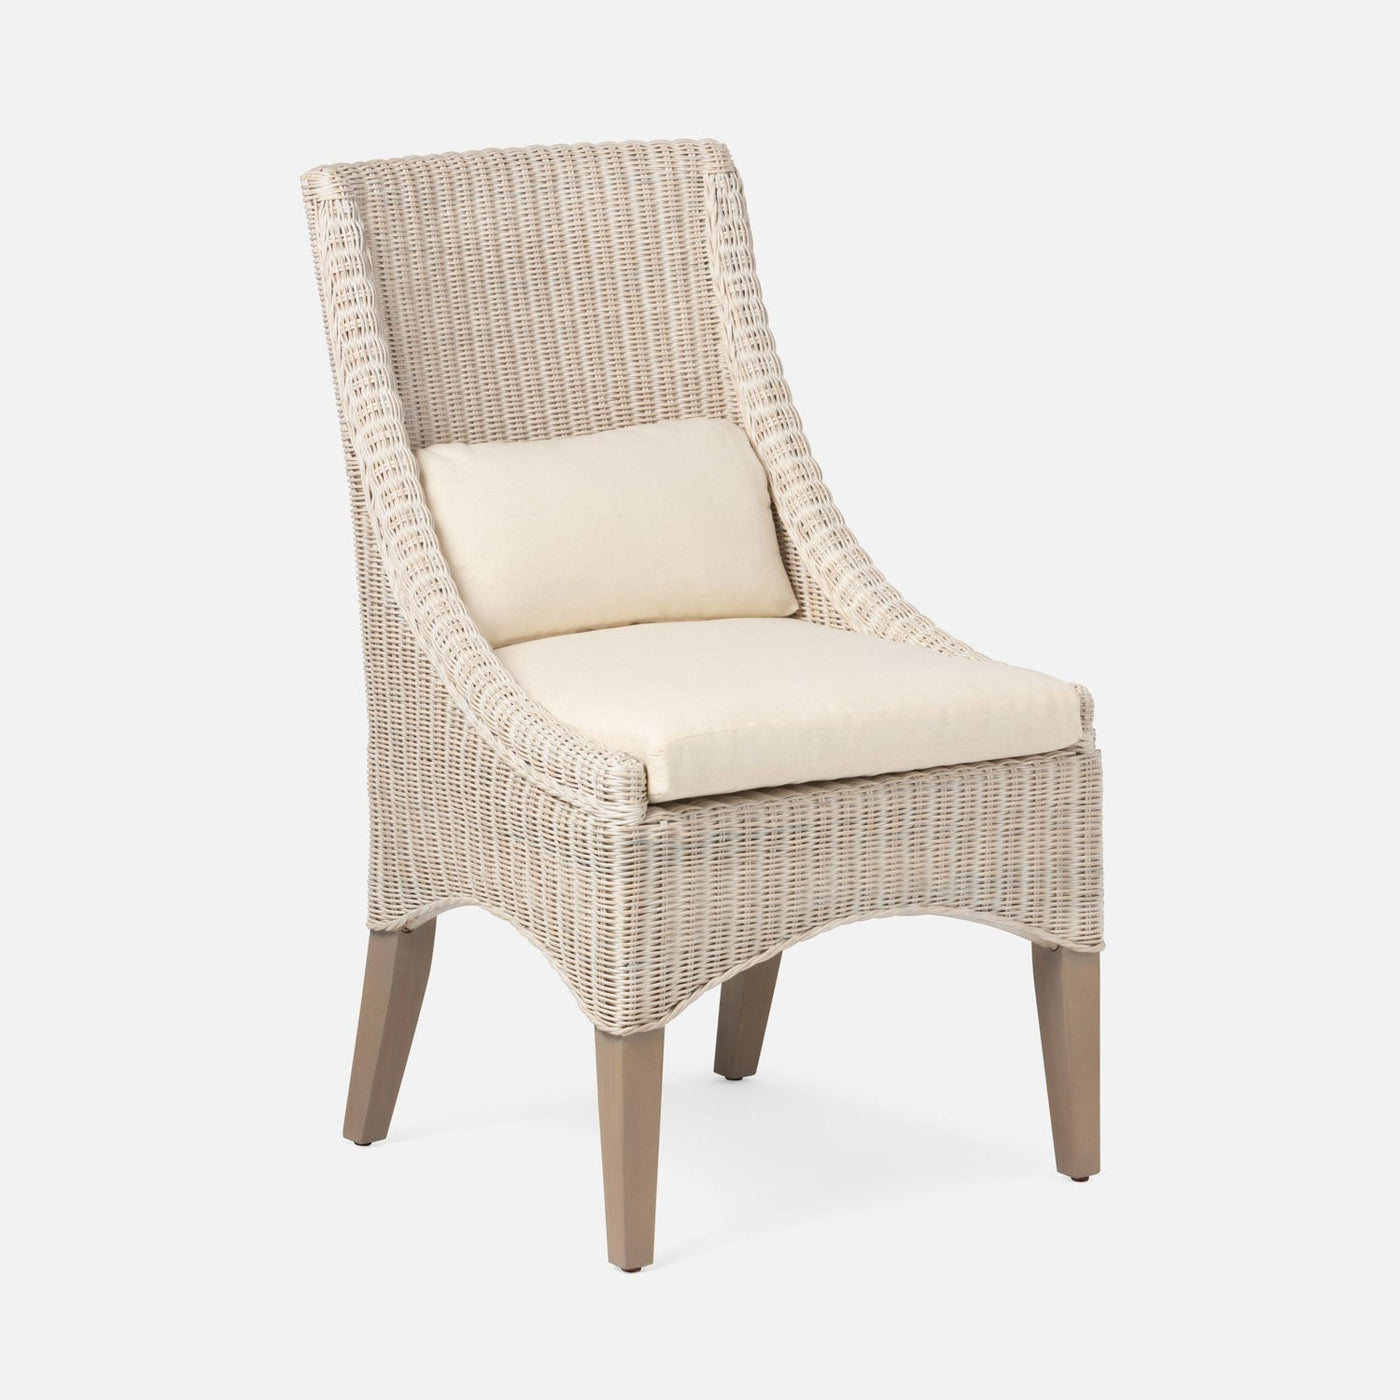 CHAIR DINING WHITE WICKER